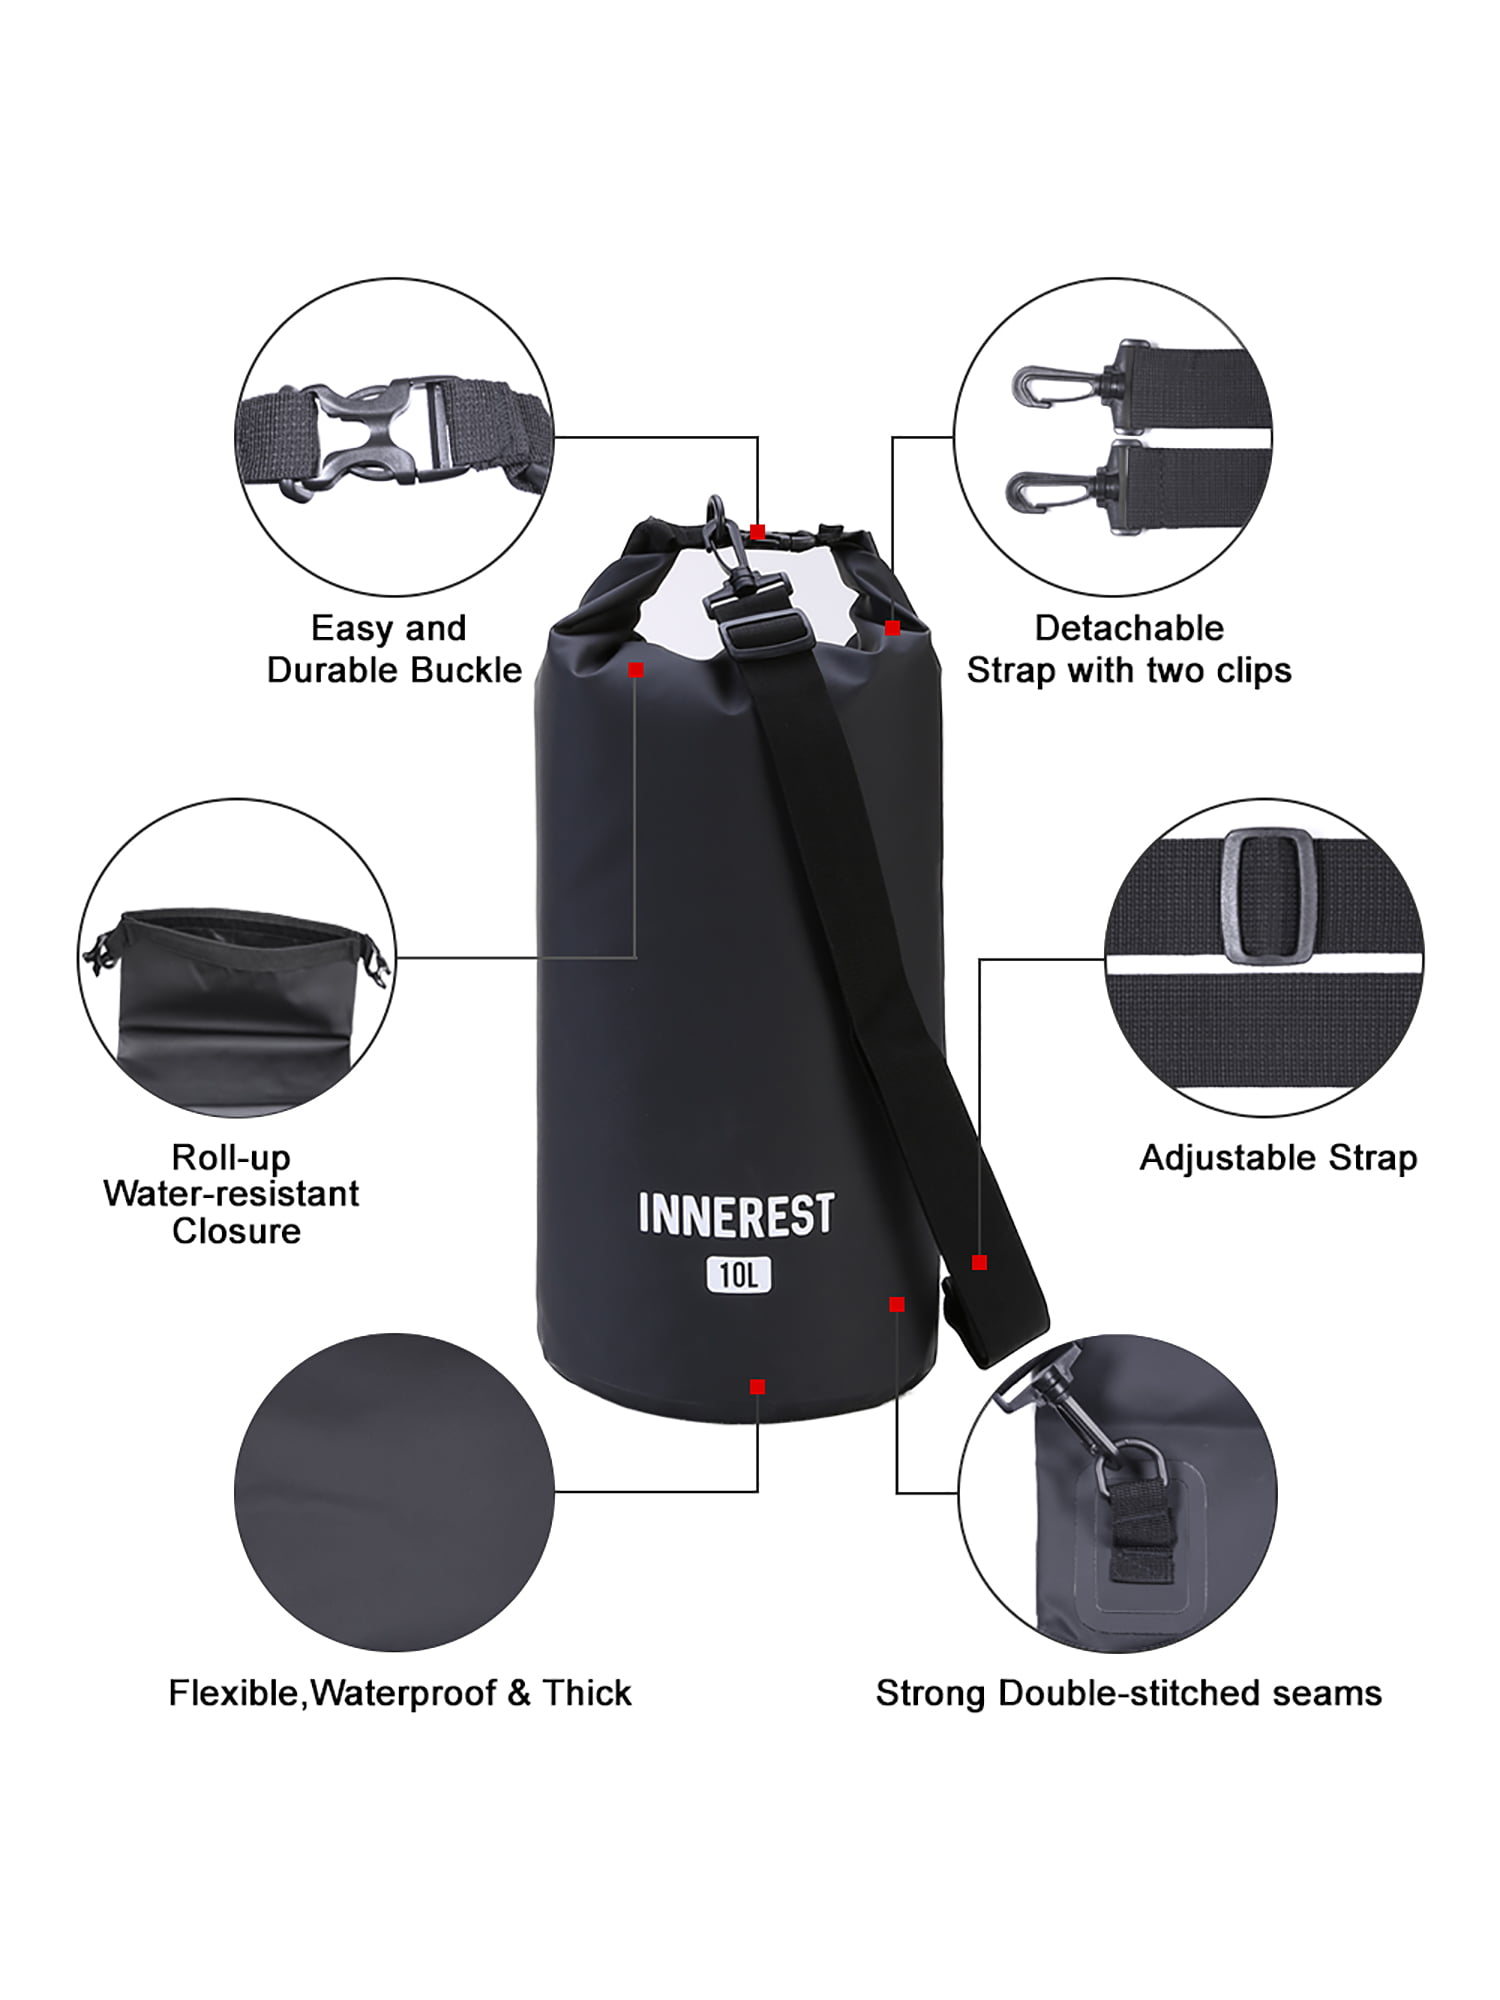 Innerest Waterproof Dry Bag Lightweight Sack for Outdoor Water Recreation Beach Boating Camping Fishing Kayaking with a